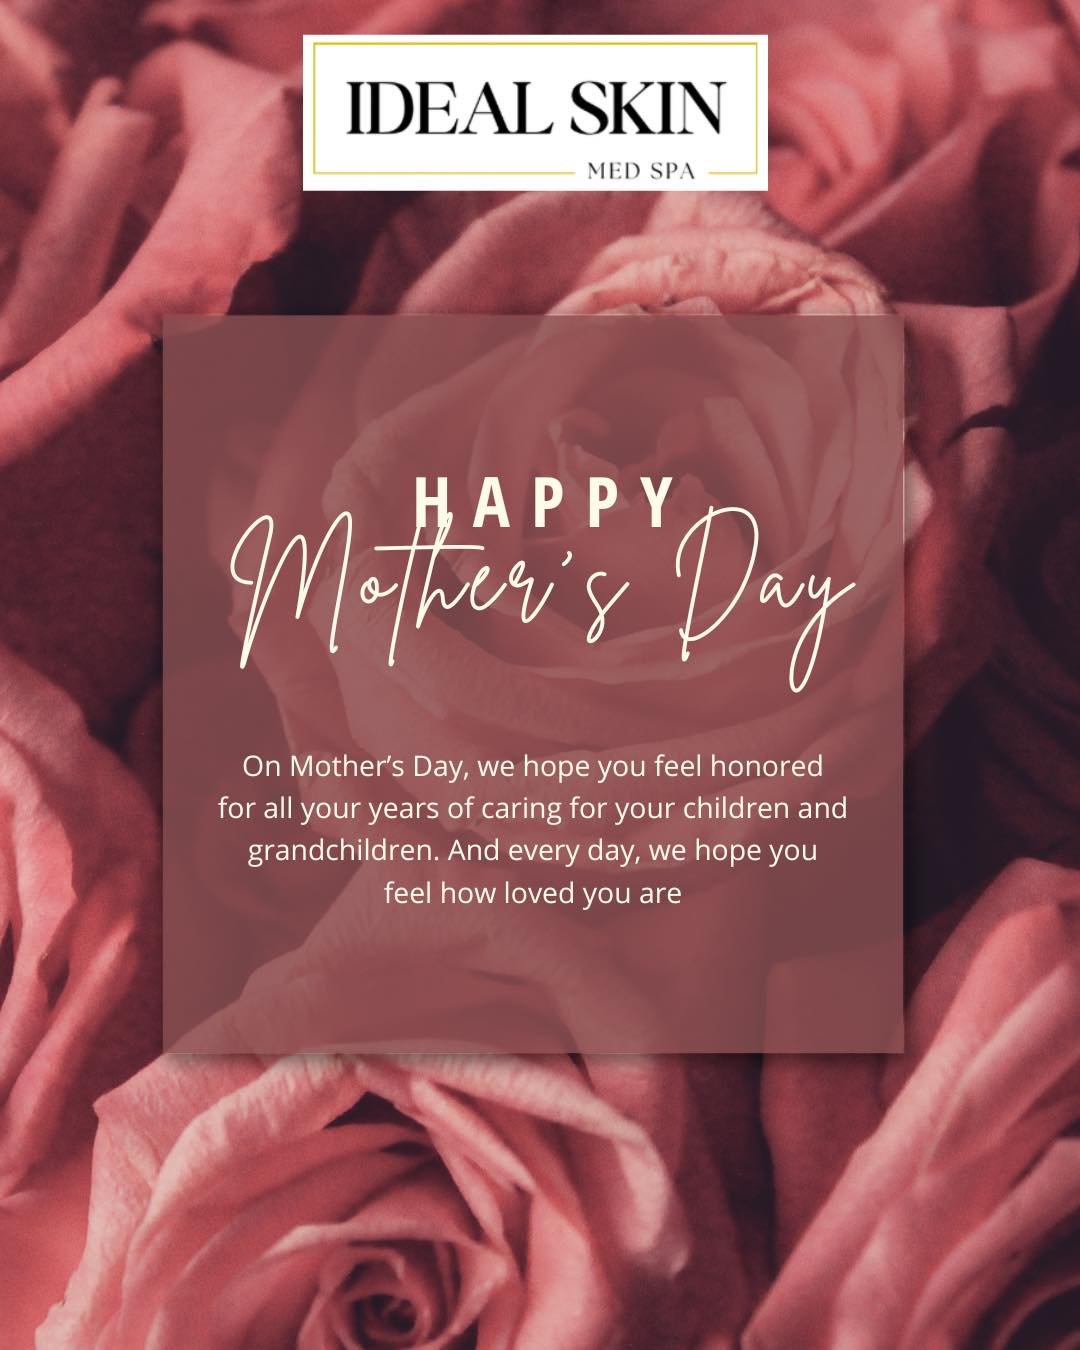 Happy Mother&rsquo;s Day! 💐 ❤️ #happymothersday #dfwinjector #fortworthmedspa #fortworthmoms #decaturtx #dfwmedspa #west7th #west7thftworth #wisecounty